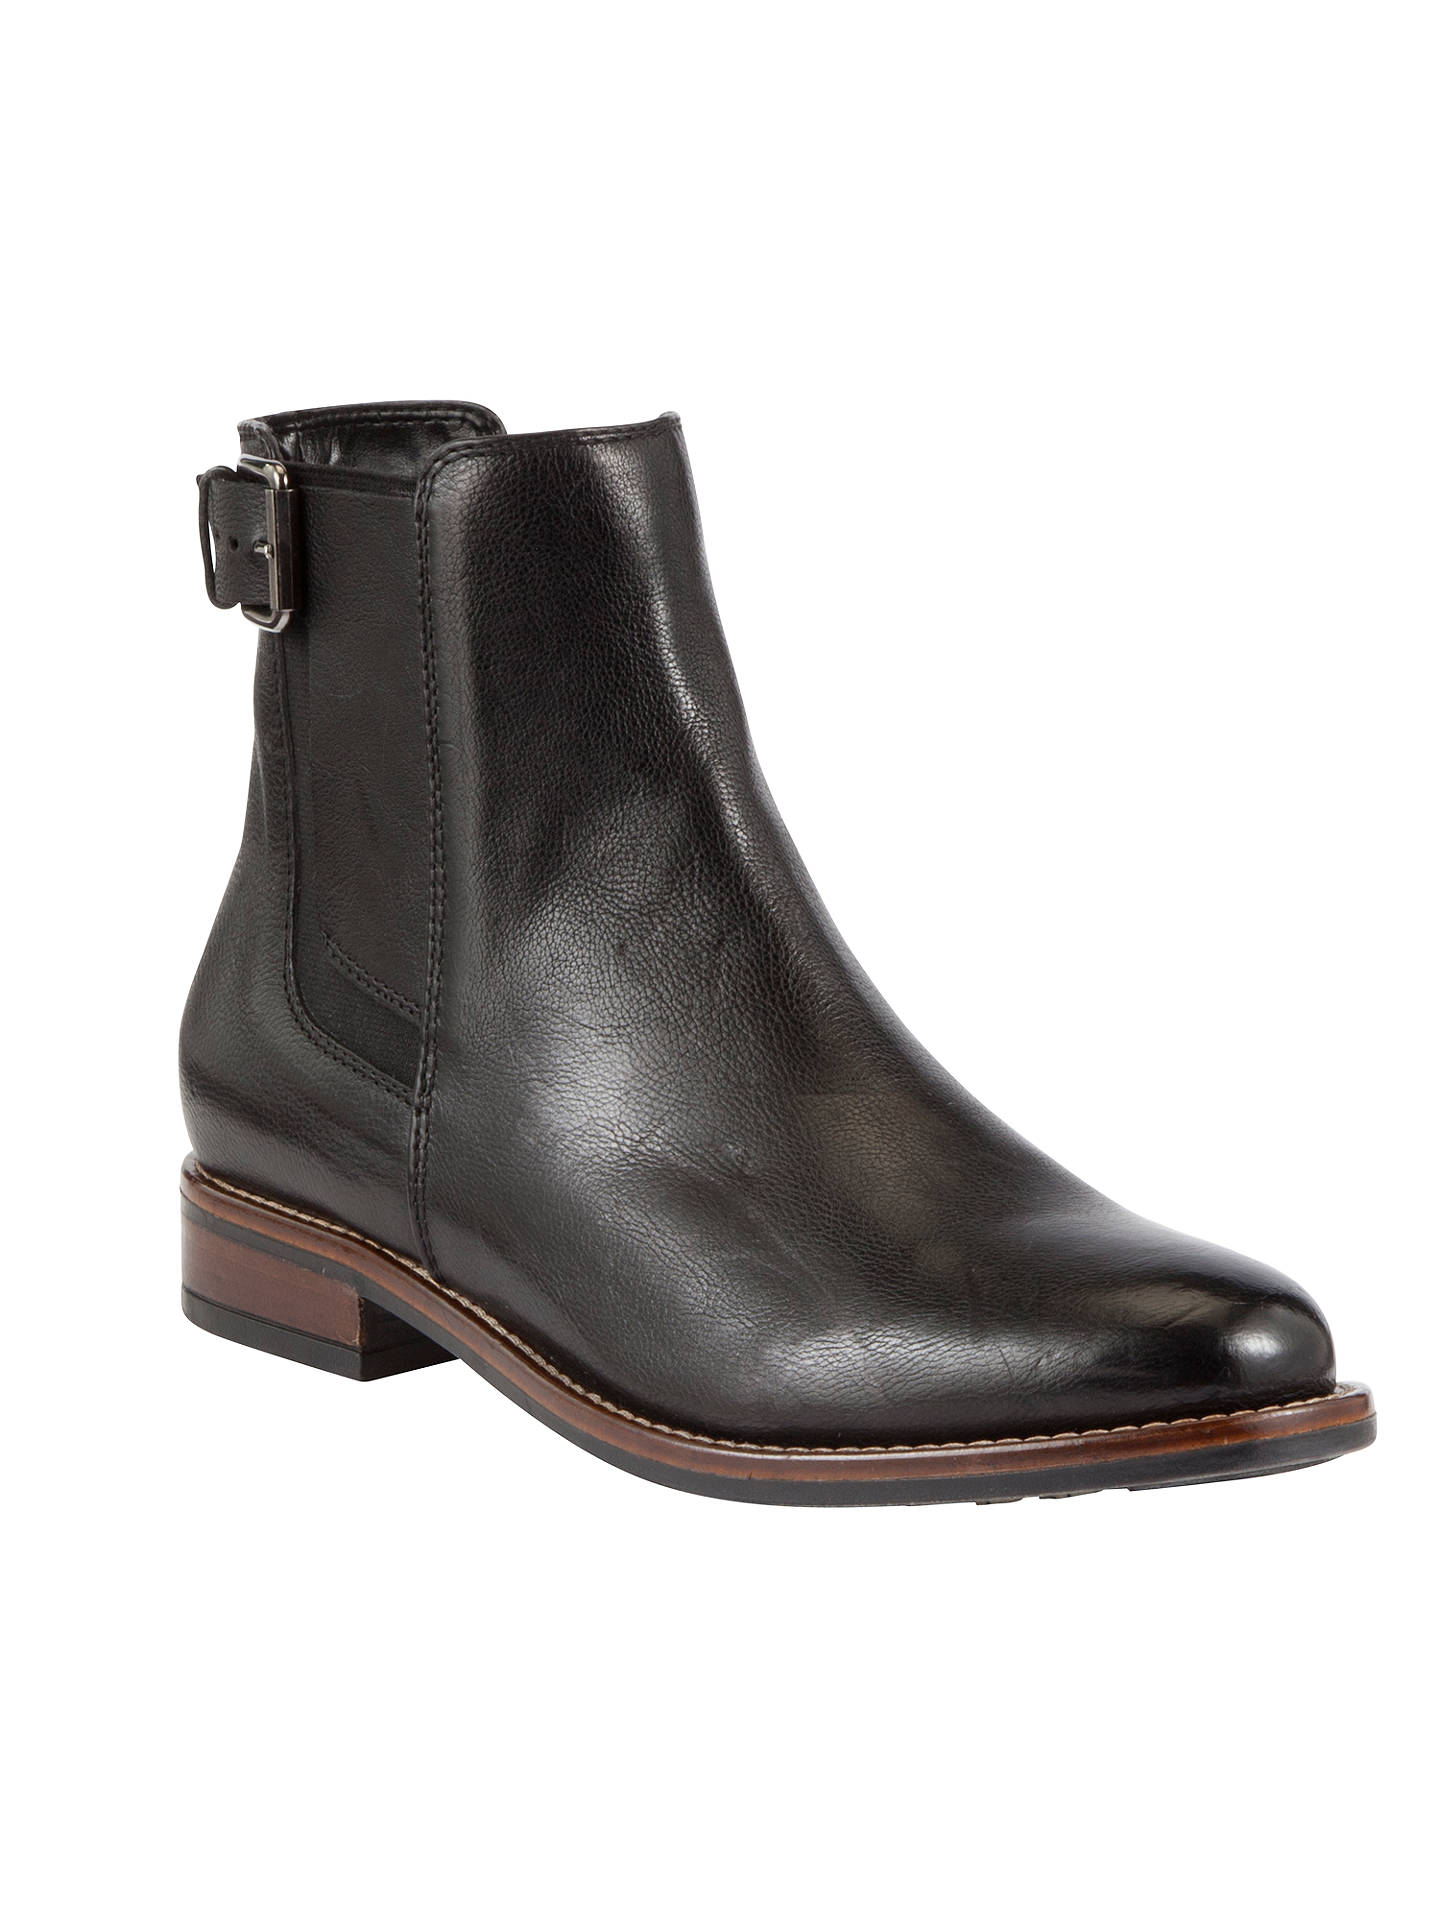 John Lewis Giza Leather Ankle Boots, Black at John Lewis & Partners